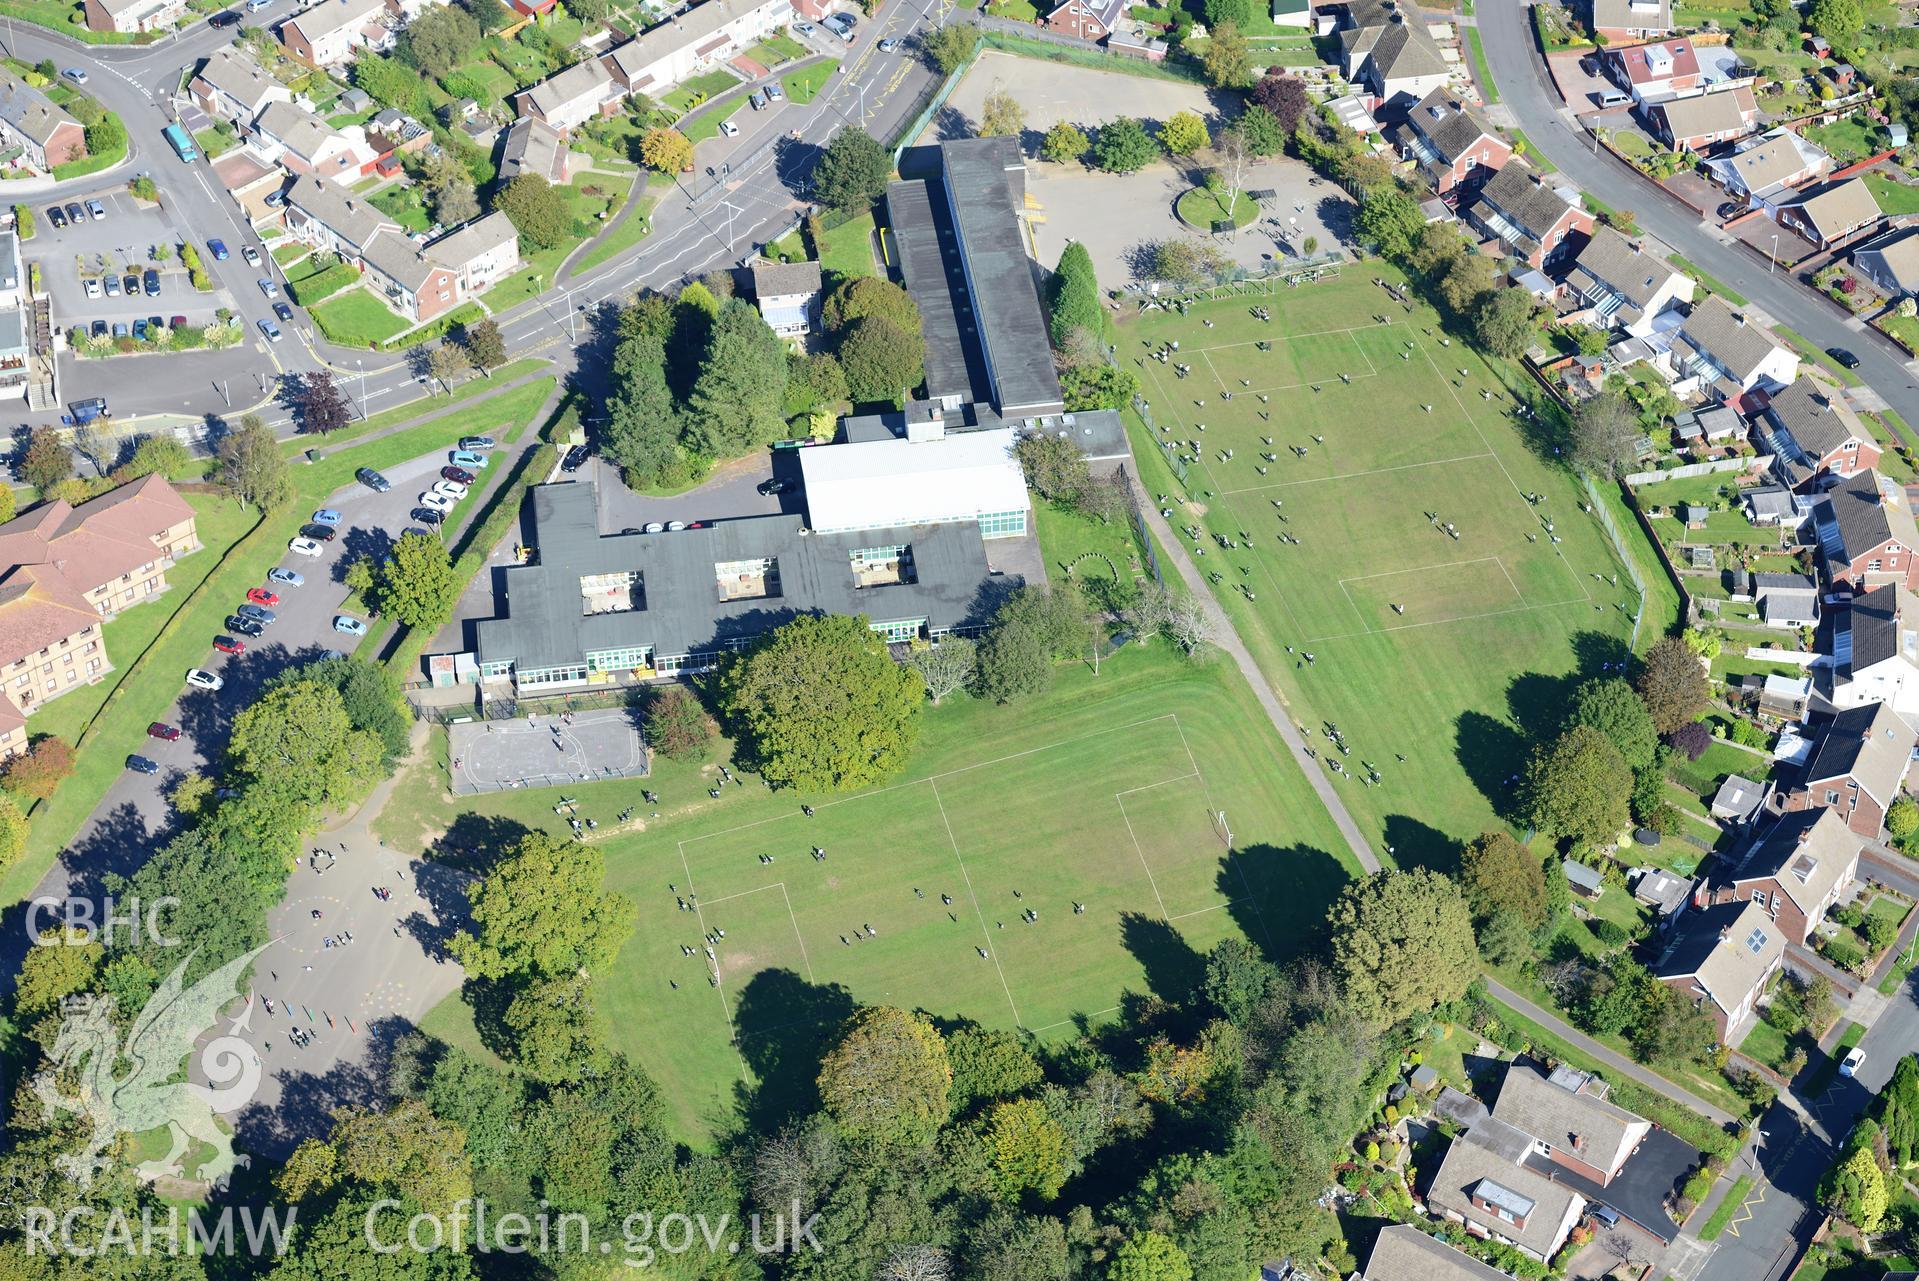 Parkland primary school, Sketty, Swansea. Oblique aerial photograph taken during the Royal Commission's programme of archaeological aerial reconnaissance by Toby Driver on 30th September 2015.